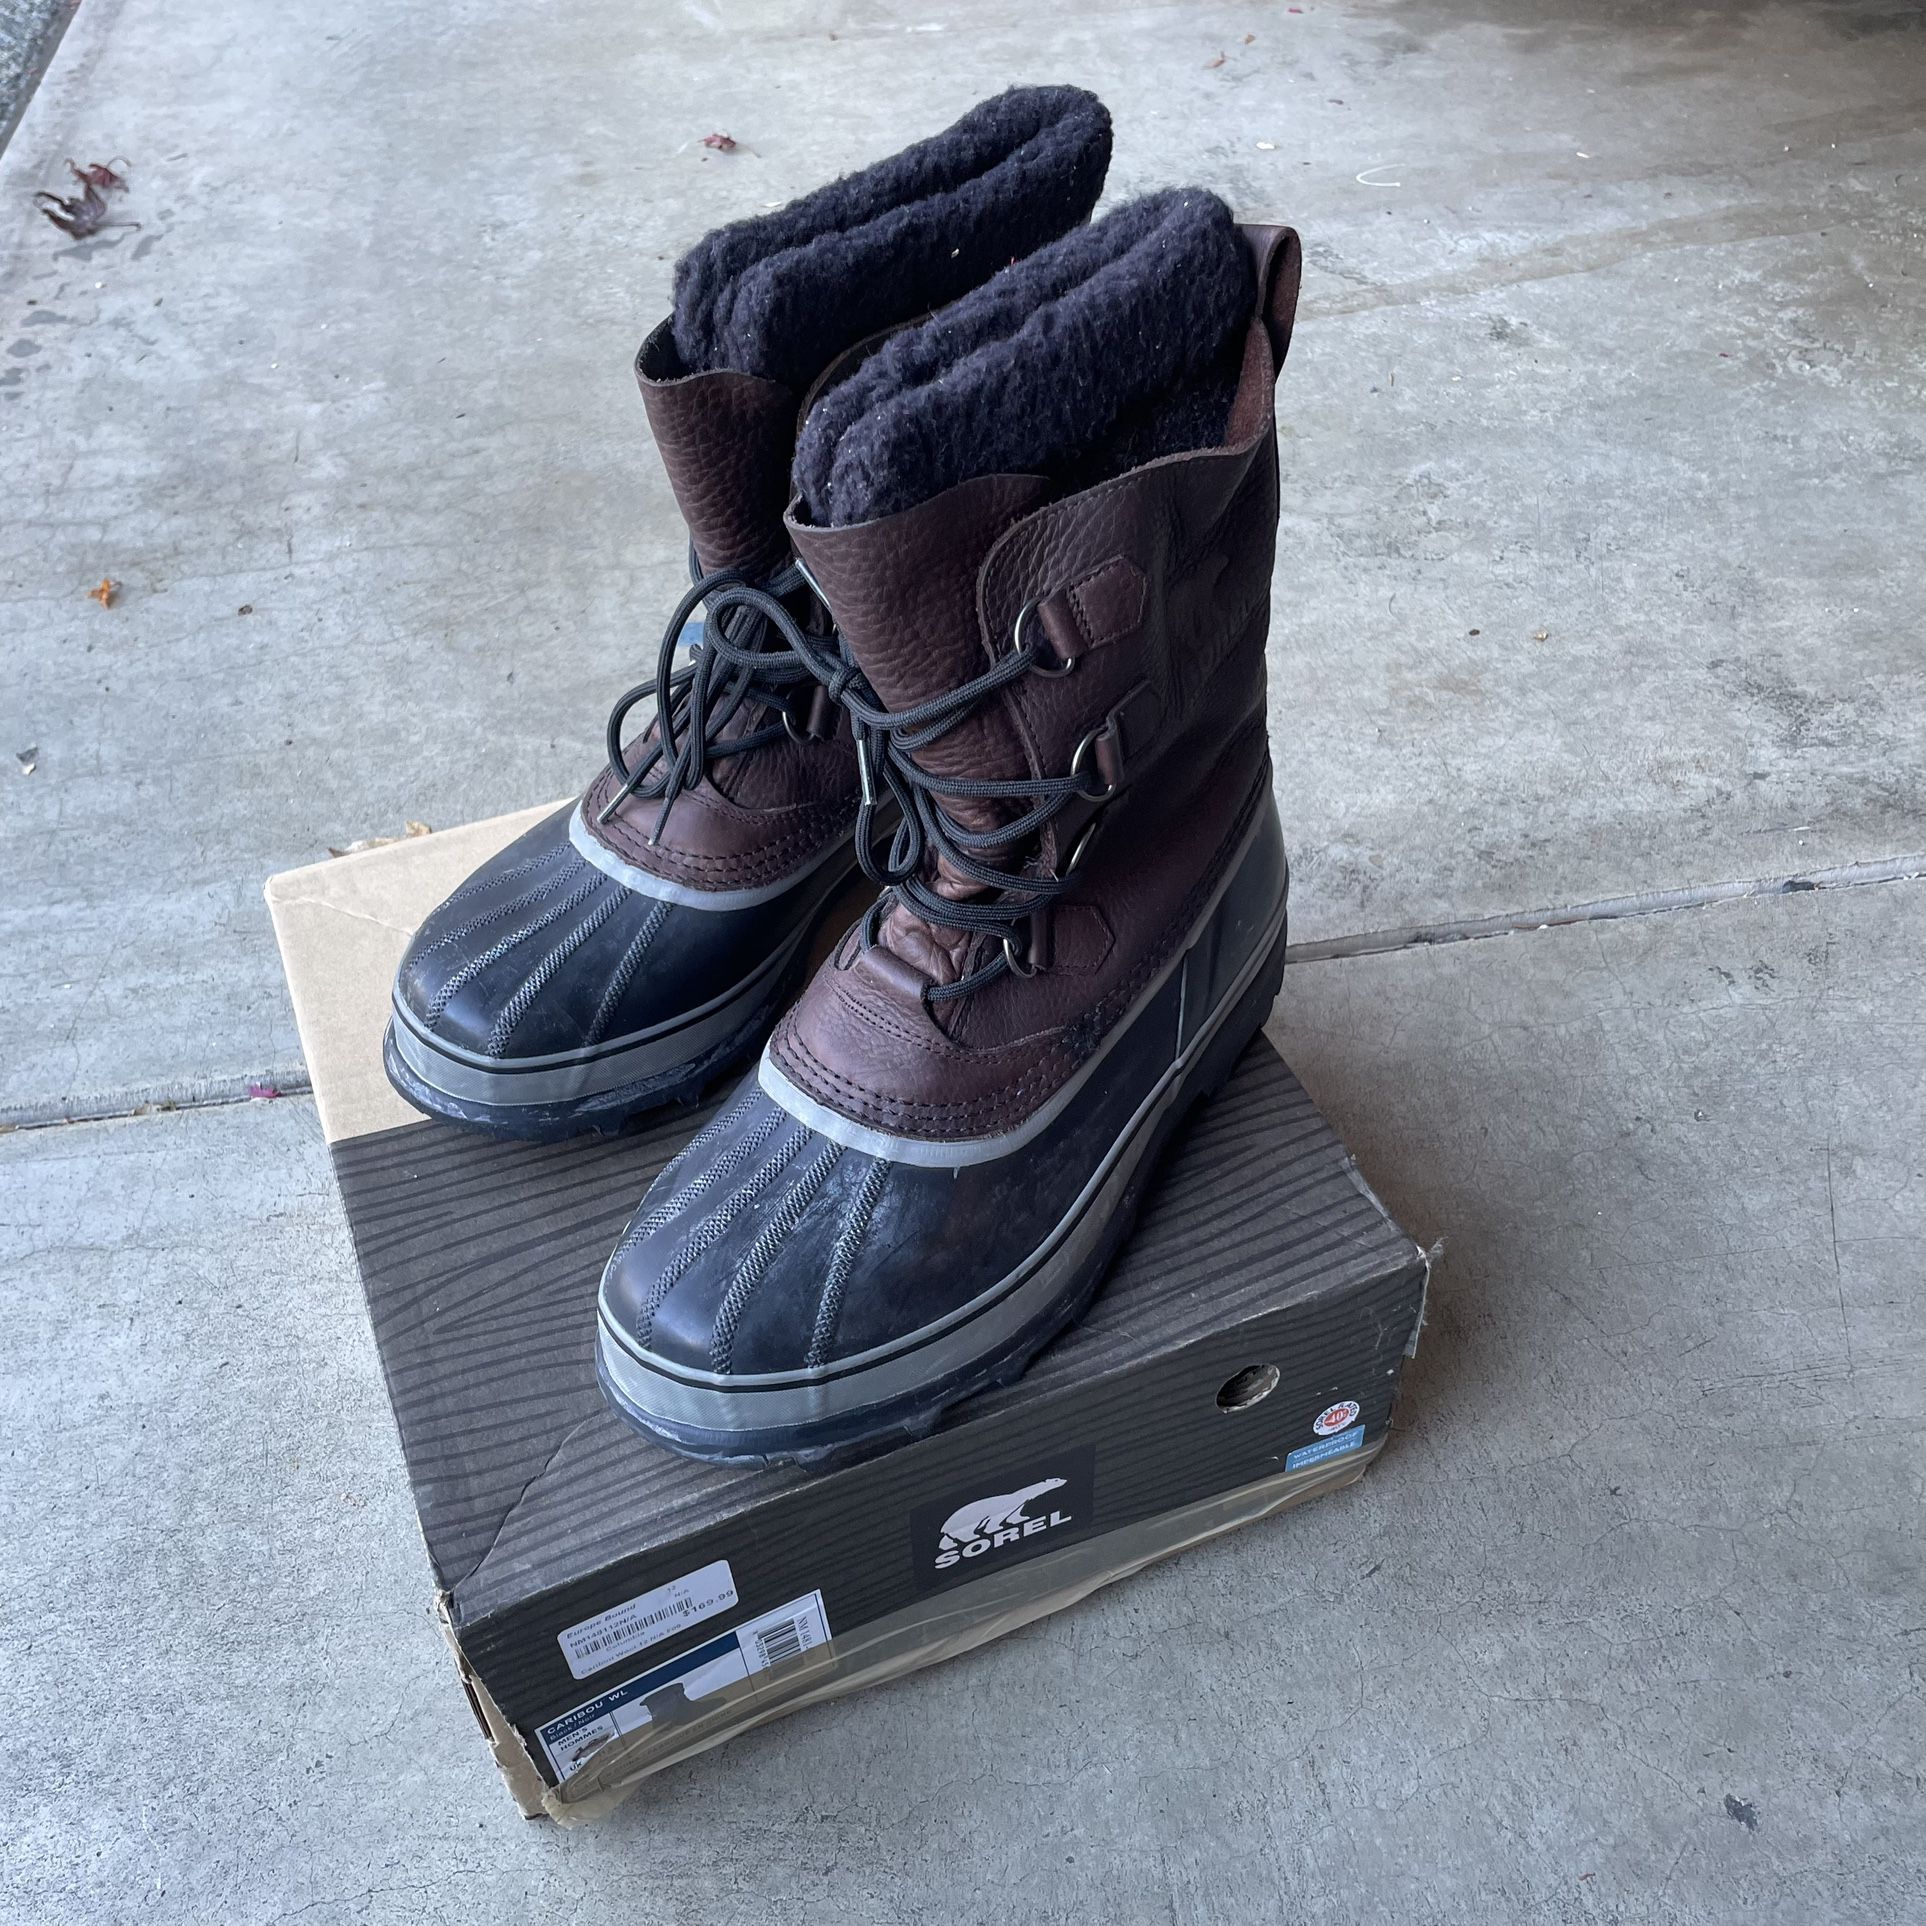 Sorel Winter Boots -For Extreme Cold Conditions - Natural Rubber